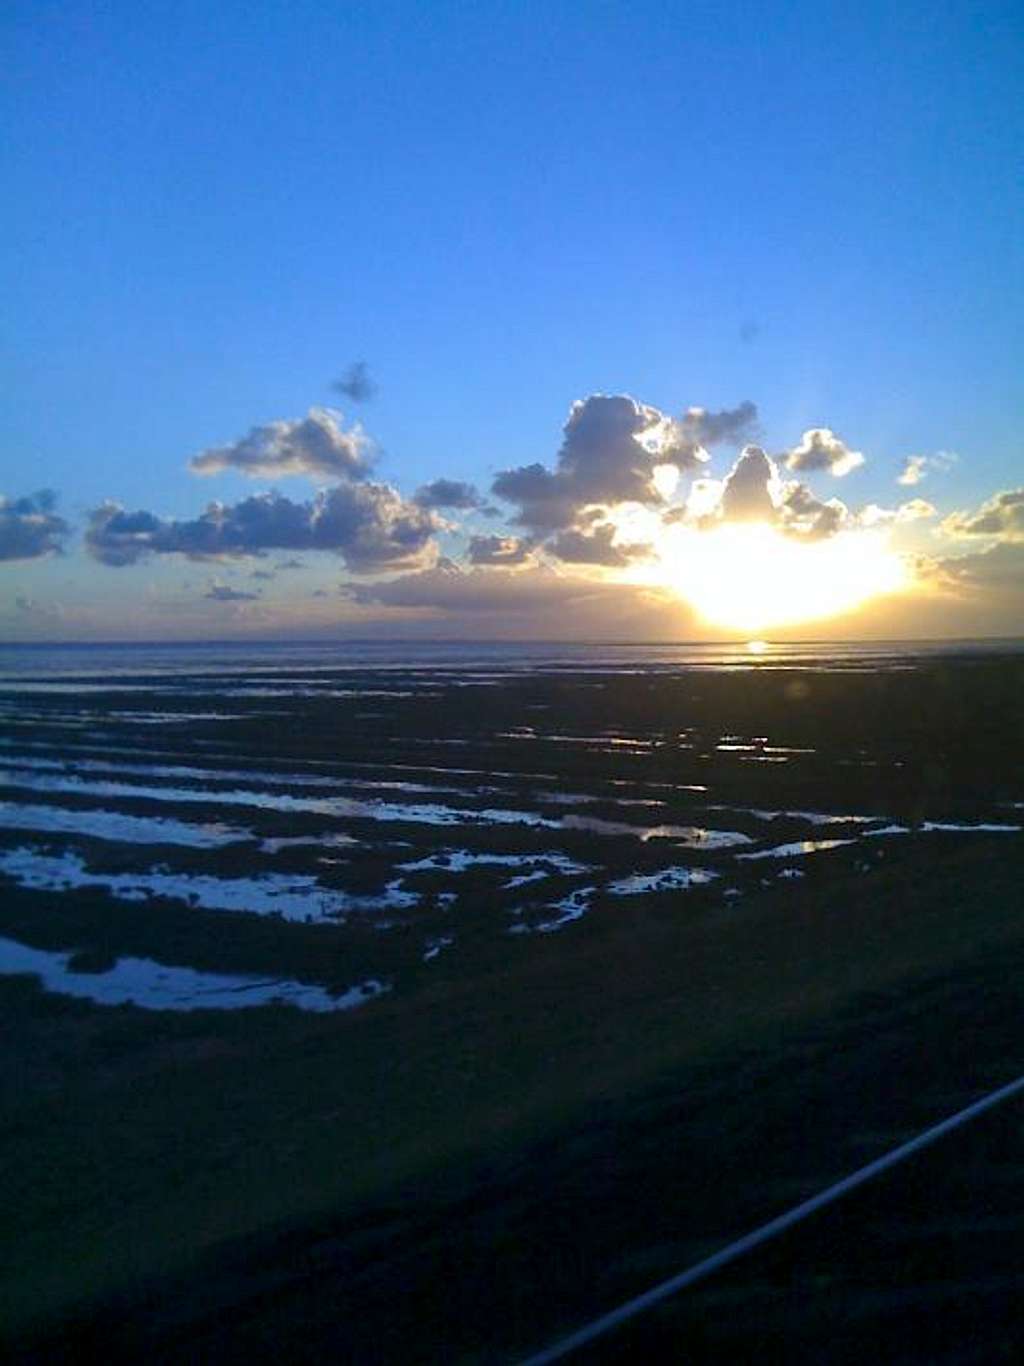 Early morning view from the train connecting Sylt with the mainland